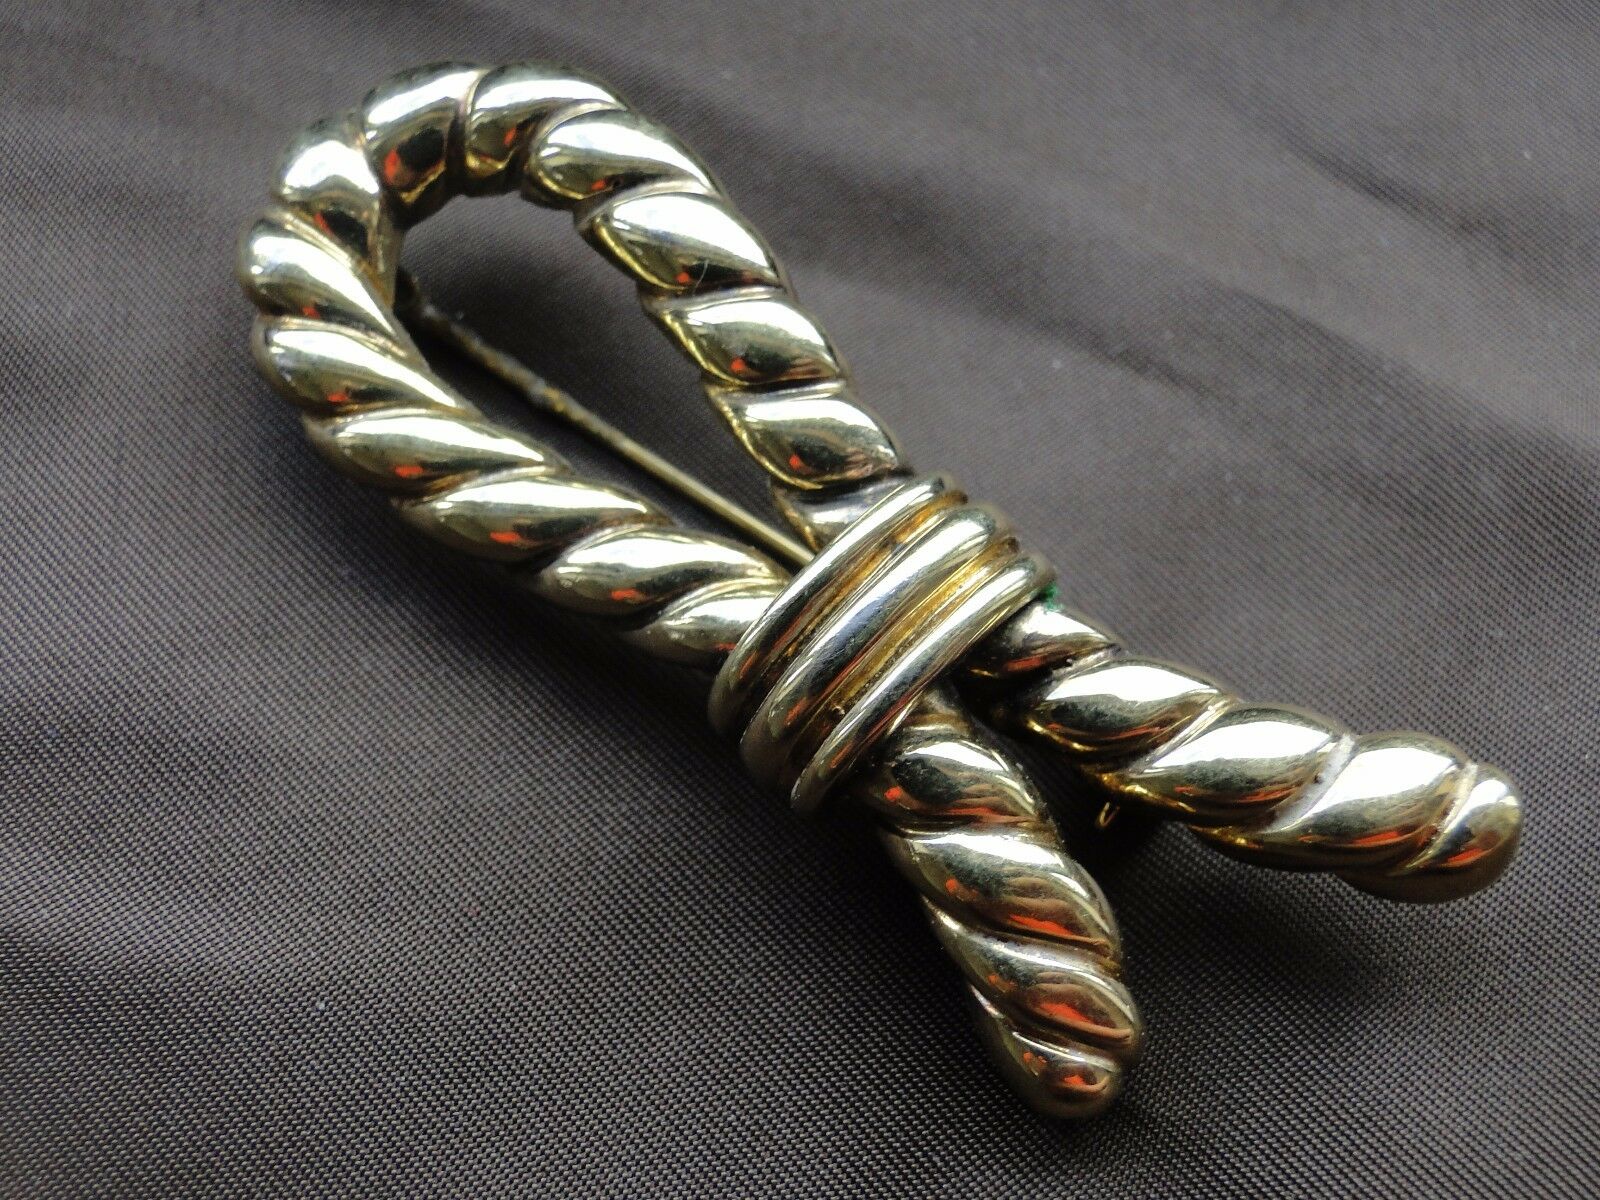 Miniature Gilt Rope, Sterling Silver, Hand Made, Italian 1950, Rope Broach